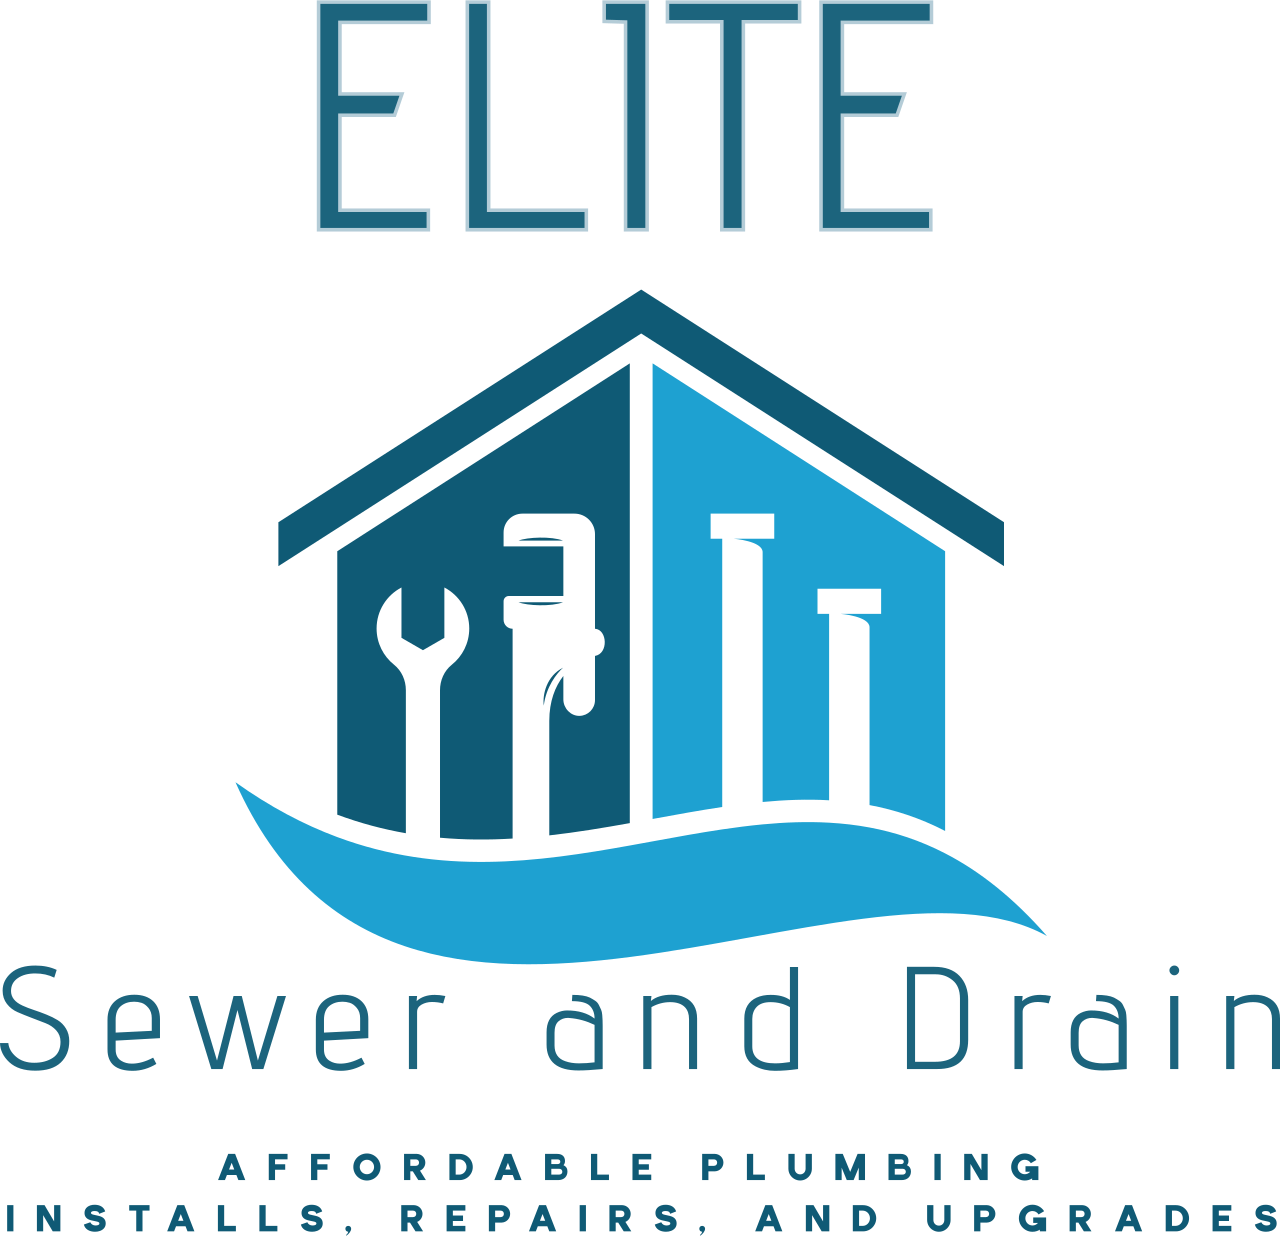 Sewer and Drain's logo